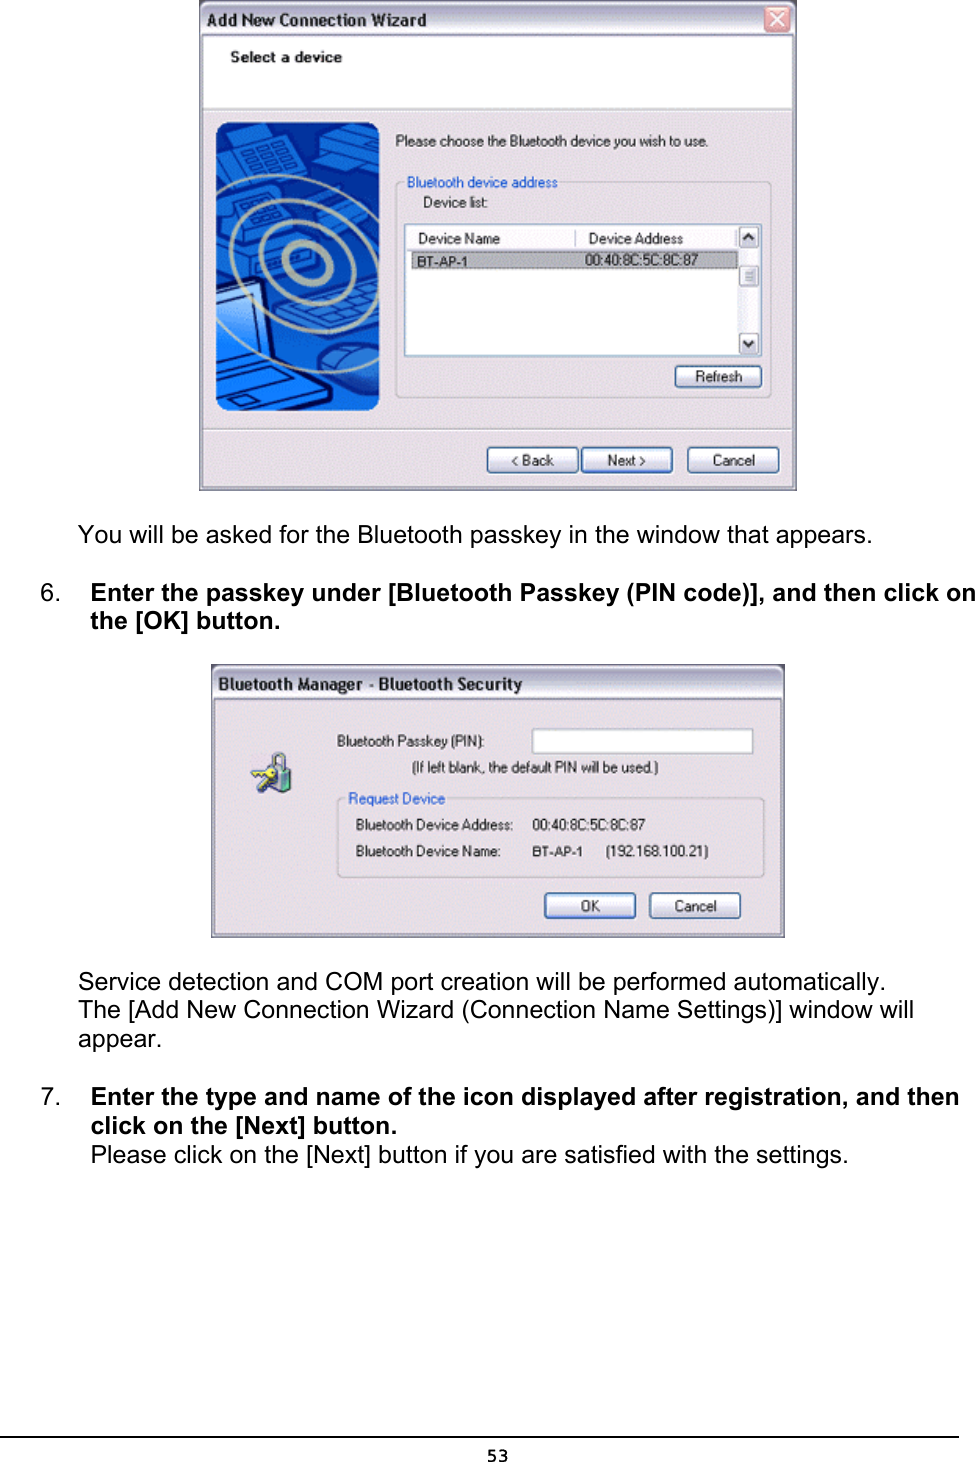   You will be asked for the Bluetooth passkey in the window that appears. 6.  Enter the passkey under [Bluetooth Passkey (PIN code)], and then click on the [OK] button.  Service detection and COM port creation will be performed automatically. The [Add New Connection Wizard (Connection Name Settings)] window will appear. 7.  Enter the type and name of the icon displayed after registration, and then click on the [Next] button. Please click on the [Next] button if you are satisfied with the settings.  53